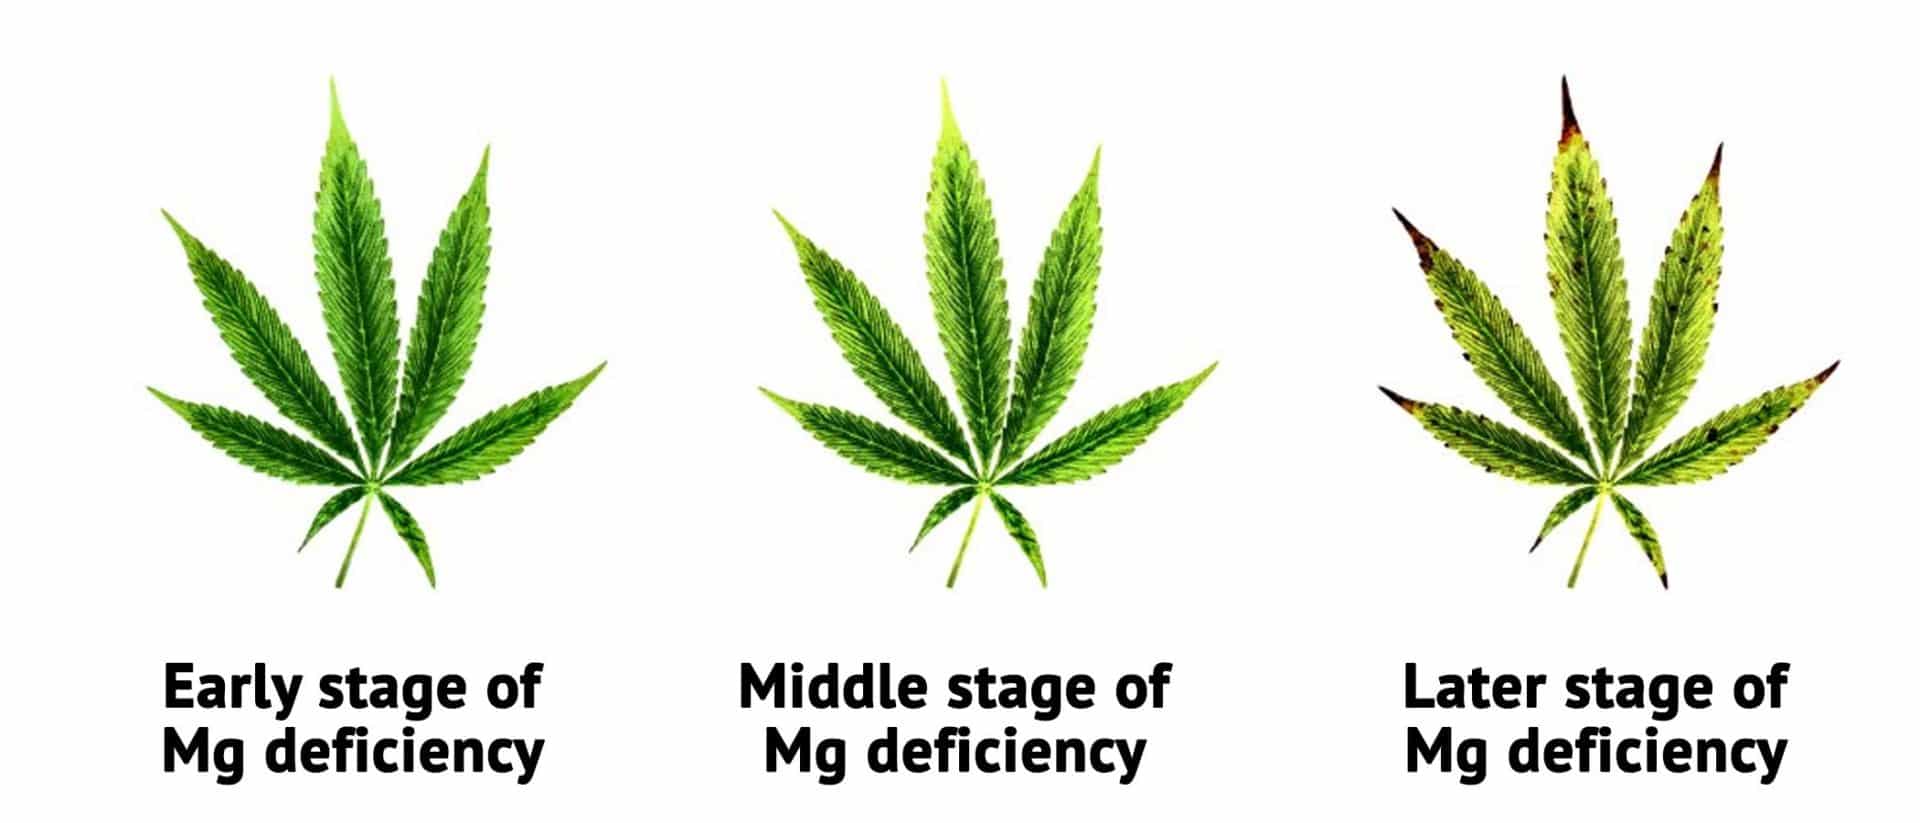 Our Guide On Magnesium Deficiency Weed | Troubleshooting | The Seed Fair